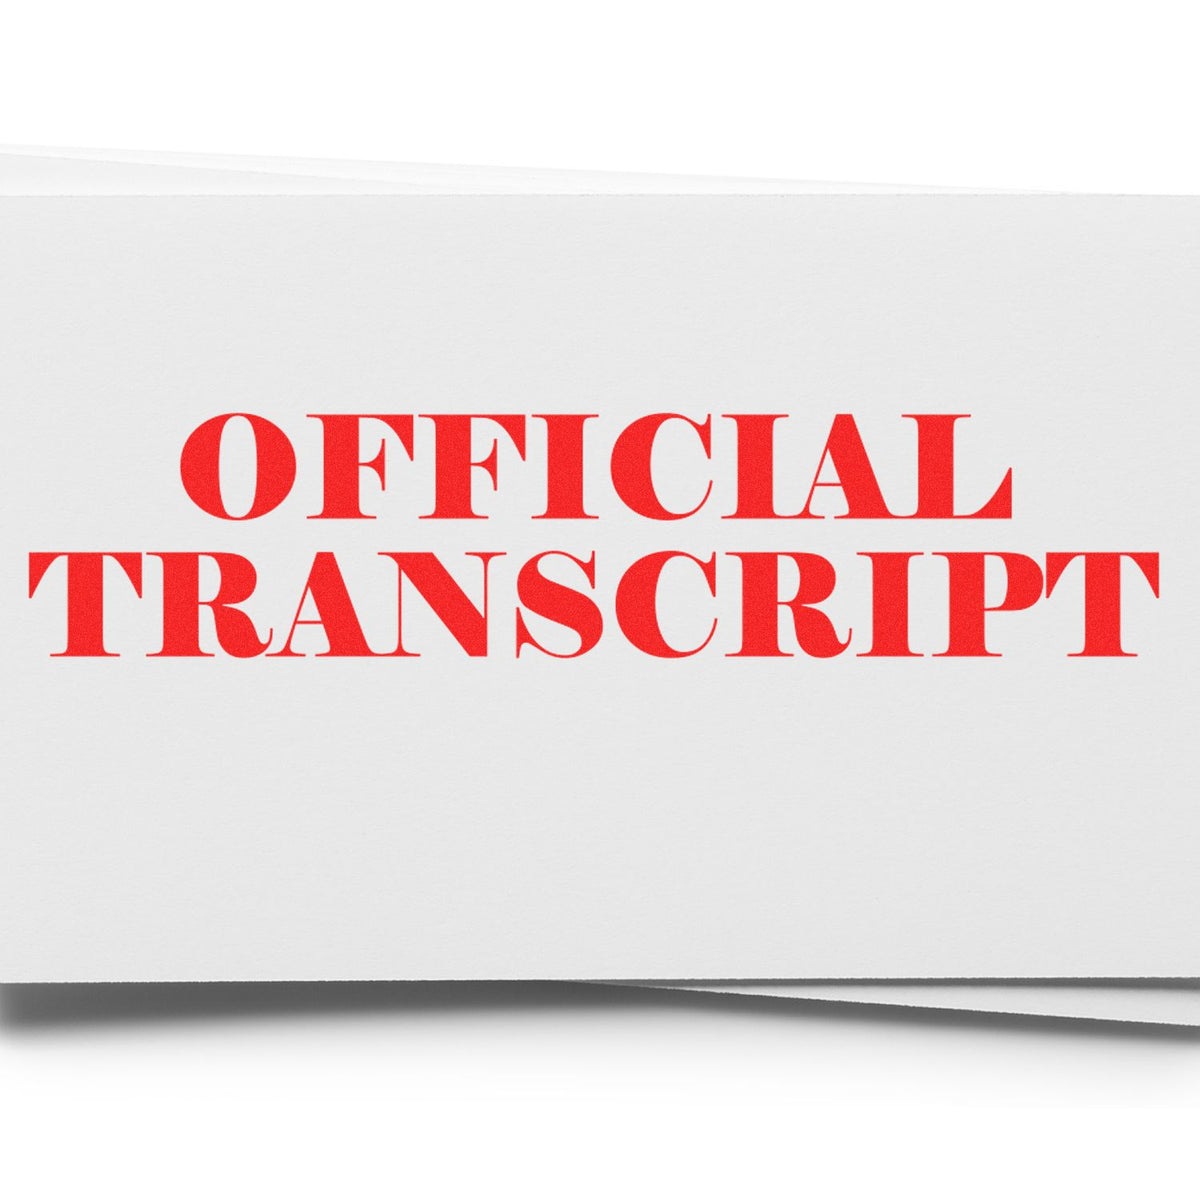 Official Transcript Rubber Stamp In Use Photo